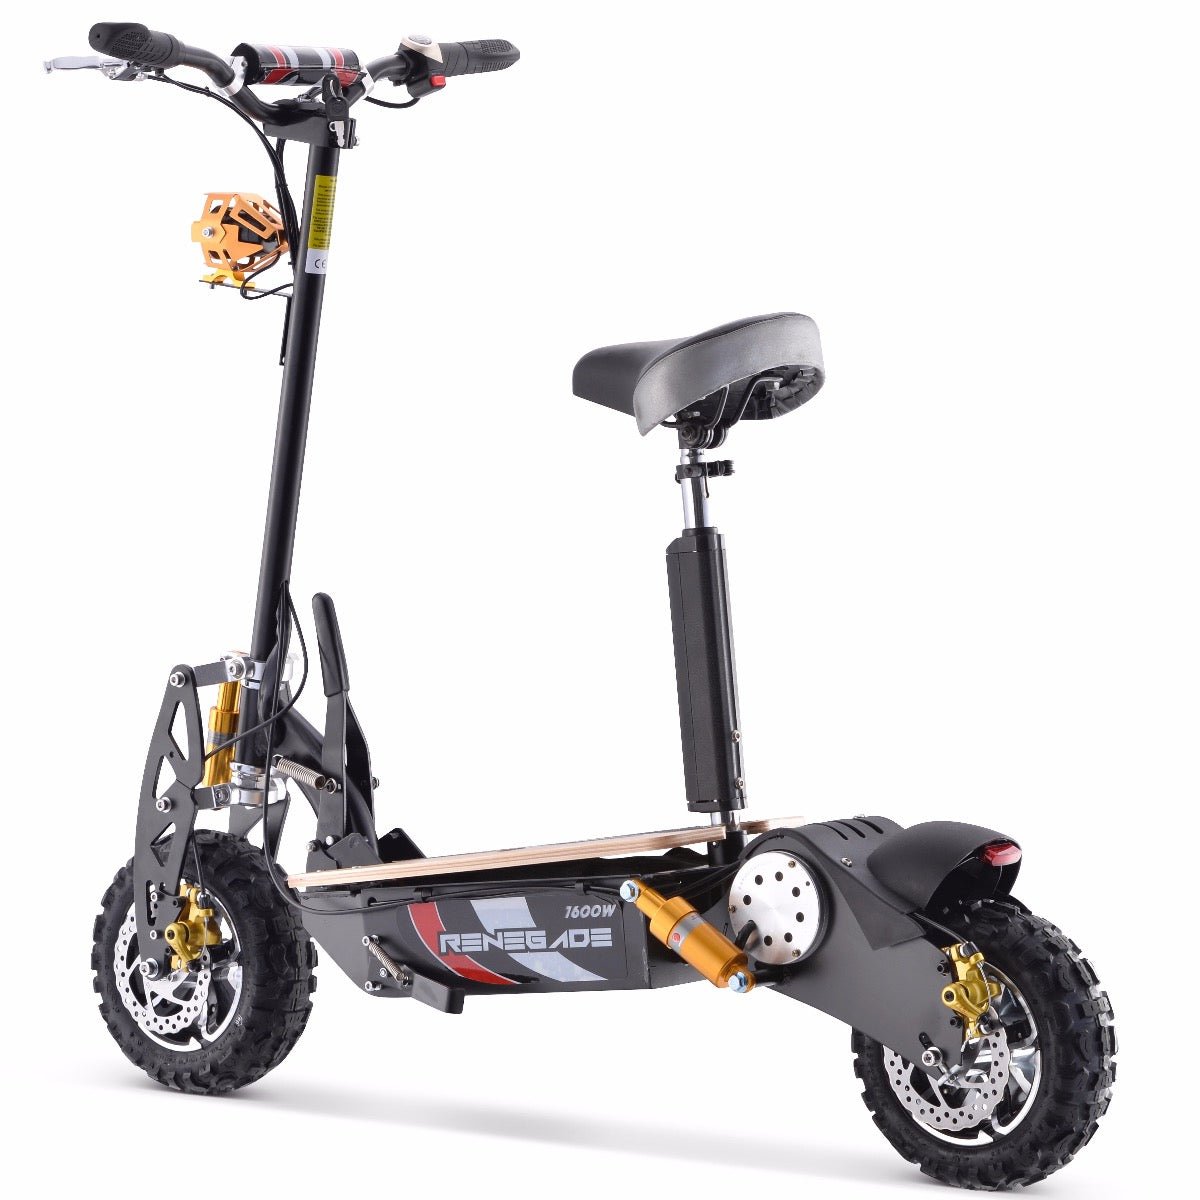 Renegade 1600W Powerboard 48V Electric Scooter - Black